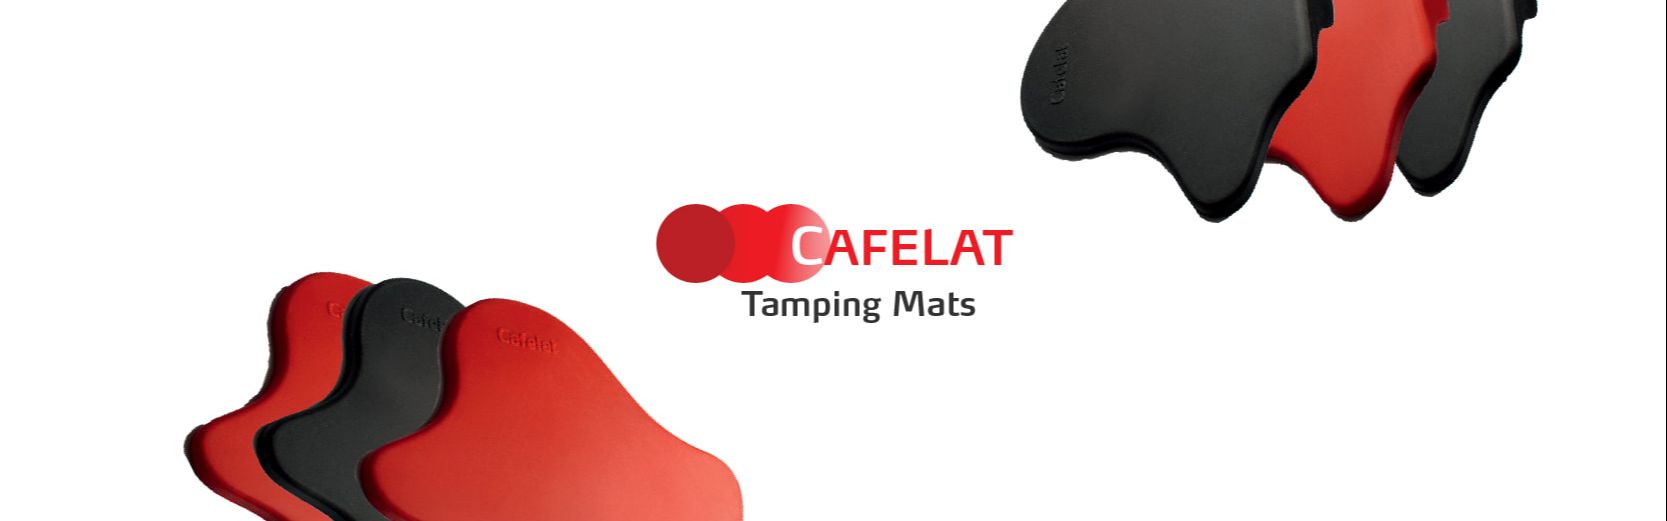 Red Cafelat Silicone Coffee Tamper Seat Fits Up To 59mm Holder Tamping Mat 